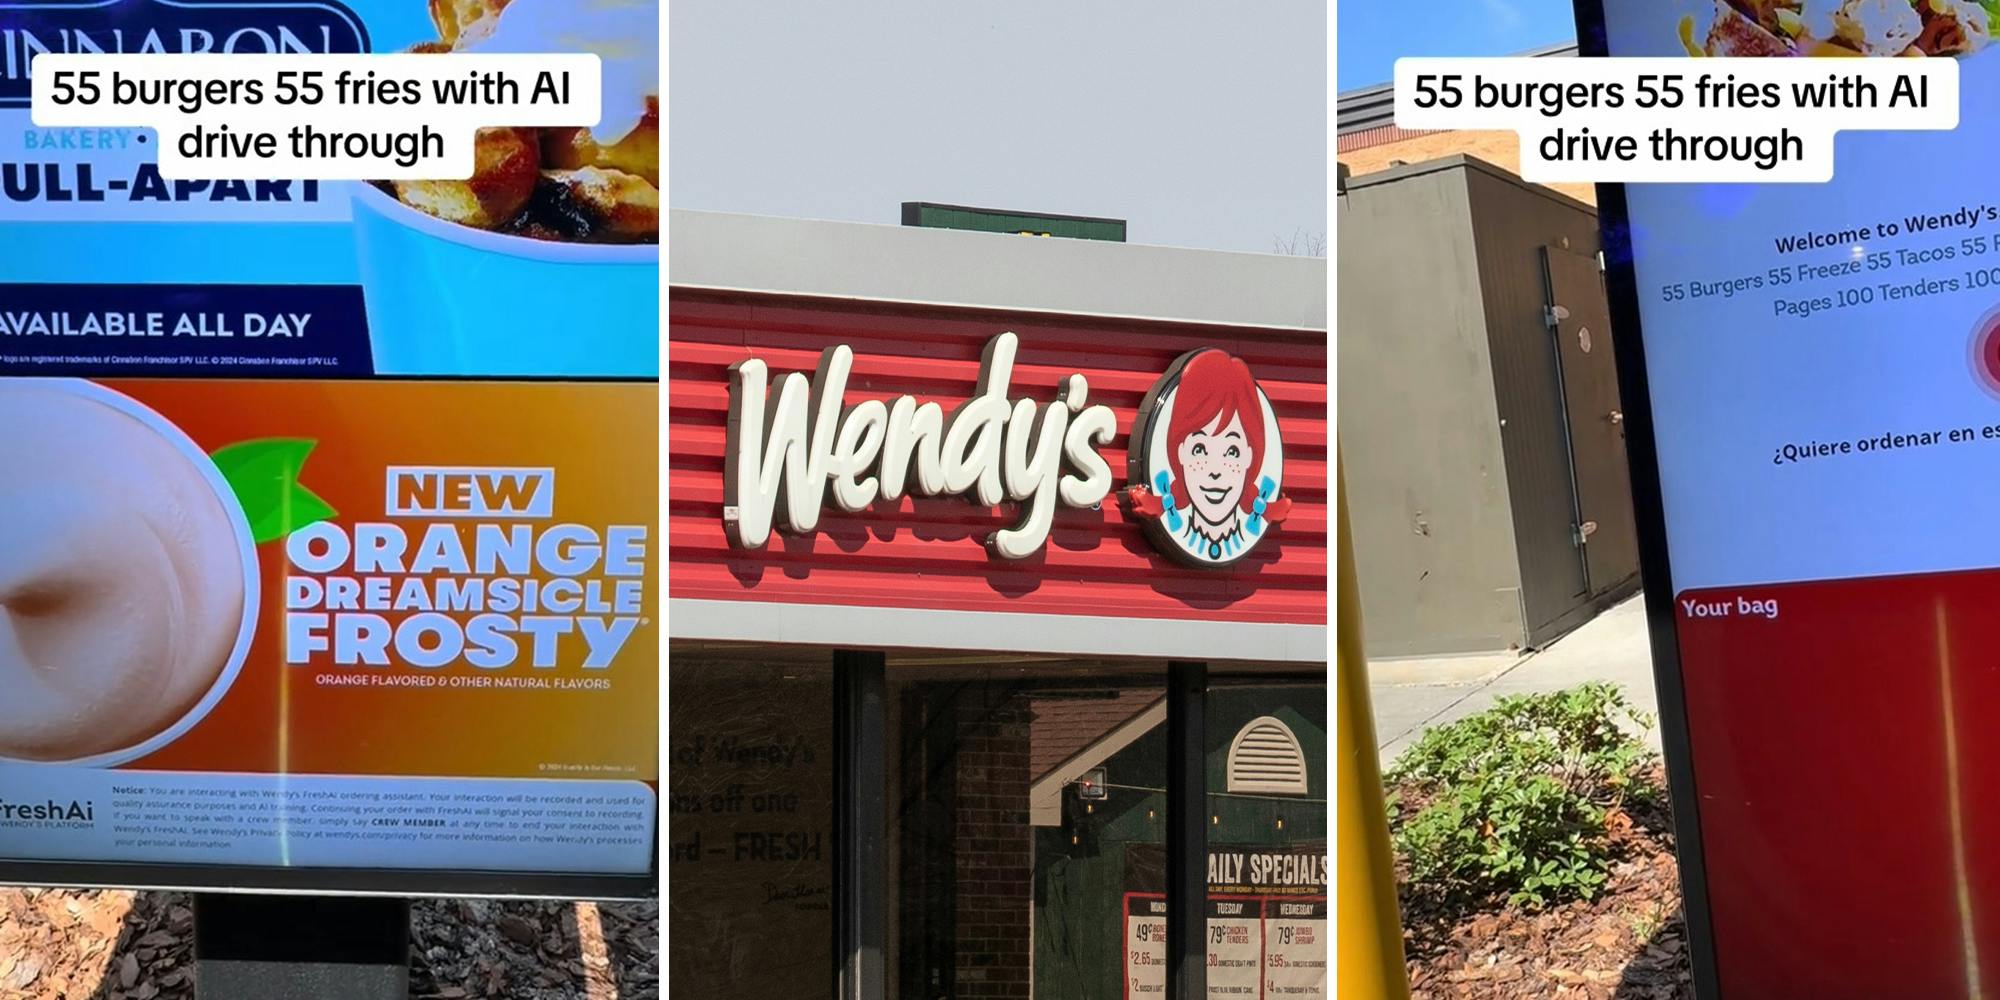 ‘I’ll just come in’: Man tries to order 55 burgers, 55 fries through Wendy’s AI drive-thru. It backfires